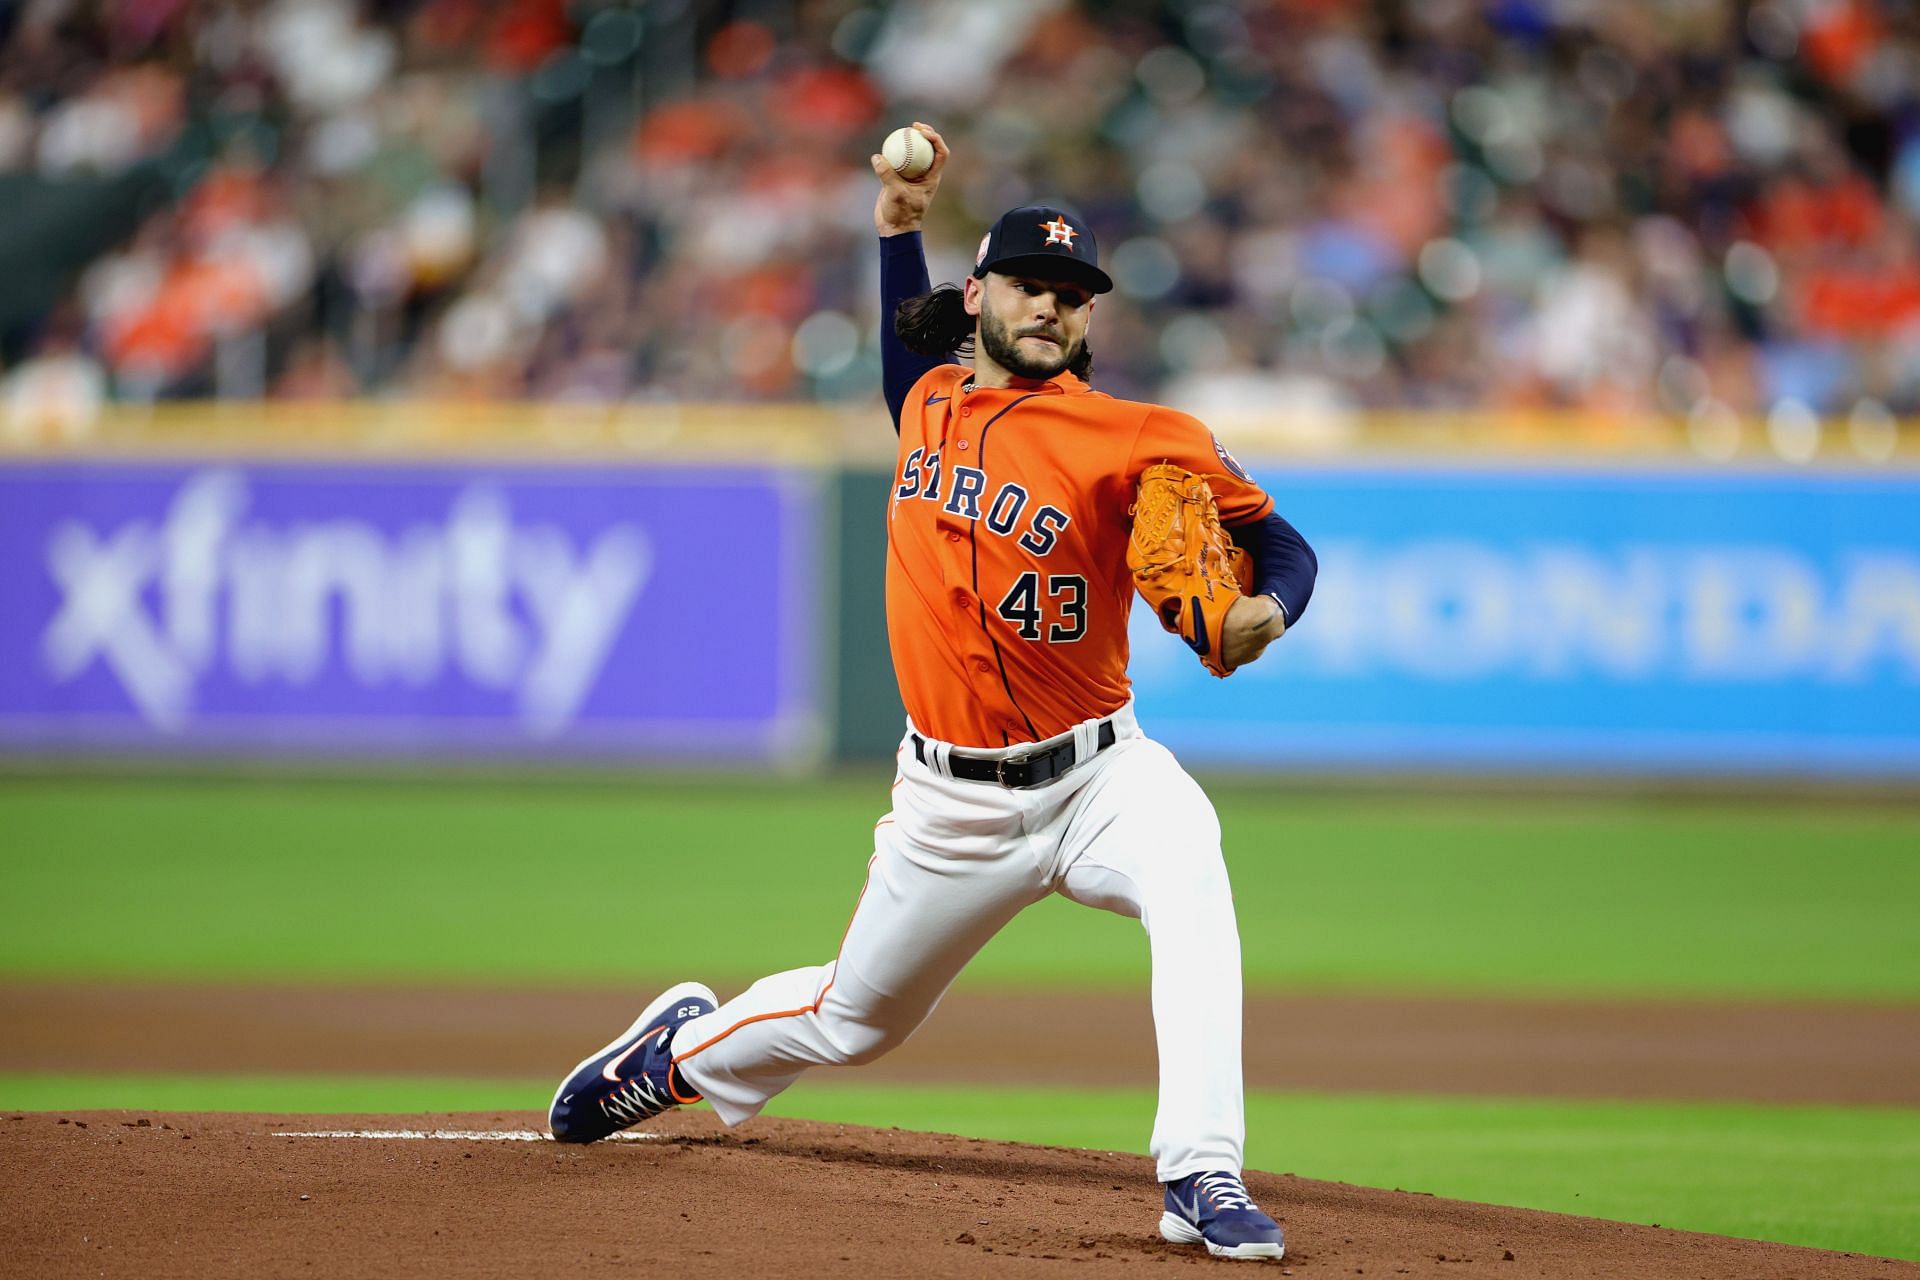 Lance McCullers Jr. of the Houston Astros delivers a pitch against the Baltimore Orioles at Minute Maid Park